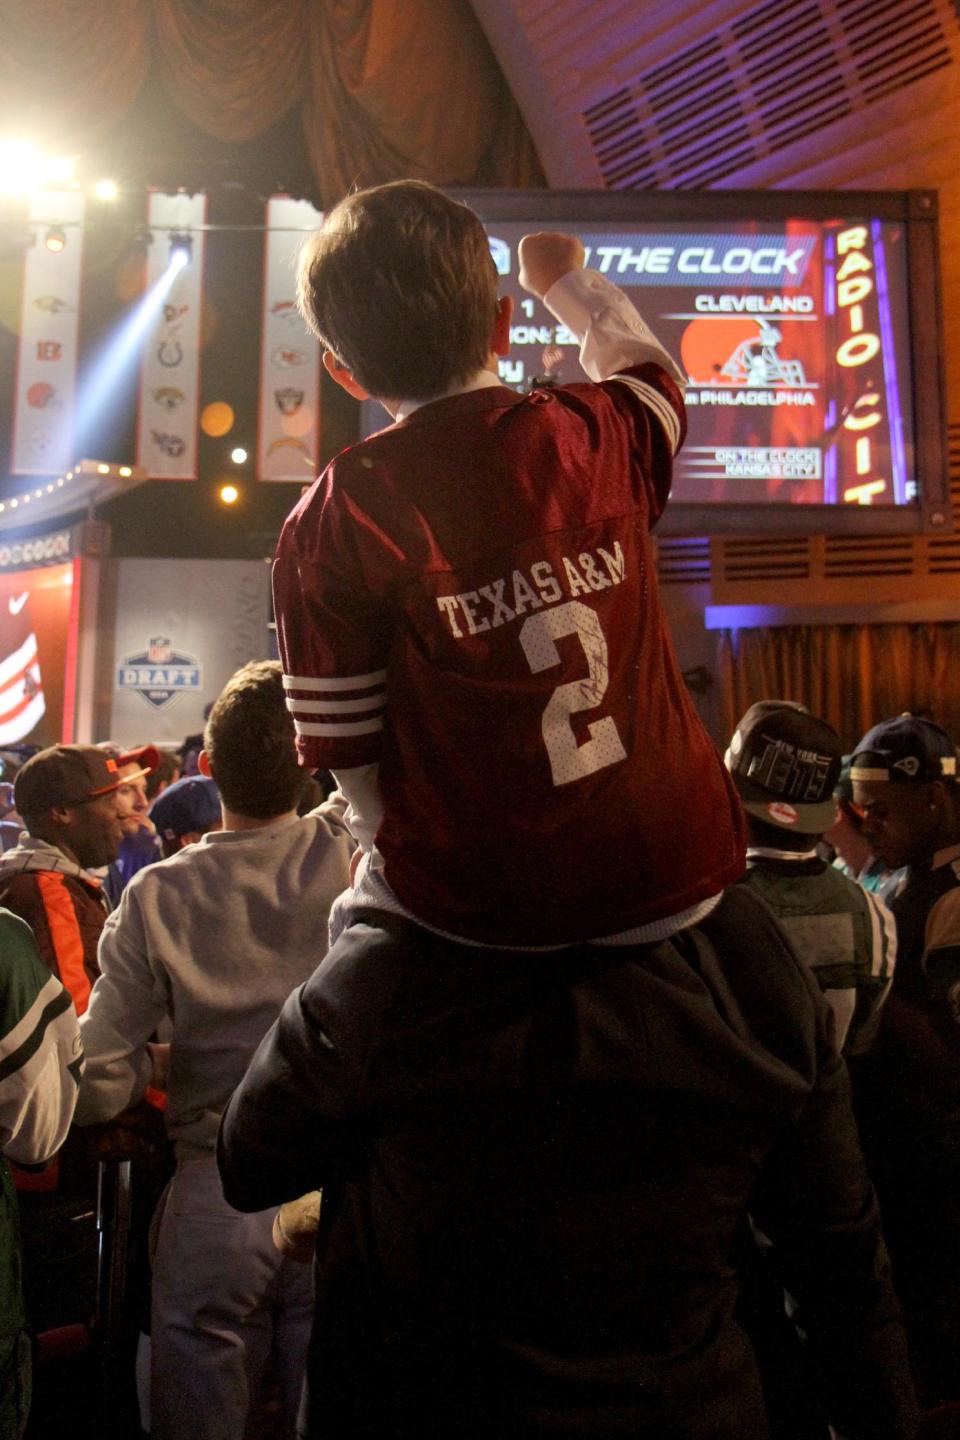 A small fan of Texas A&M reacts after Johnny Manziel (QB) is drafted first round (pick 22) by the Cleveland Browns at Radio City Music Hall for the 2014 NFL Draft on Thursday May 8th, 2014 in New York. (Jamie Herrmann/AP Images)